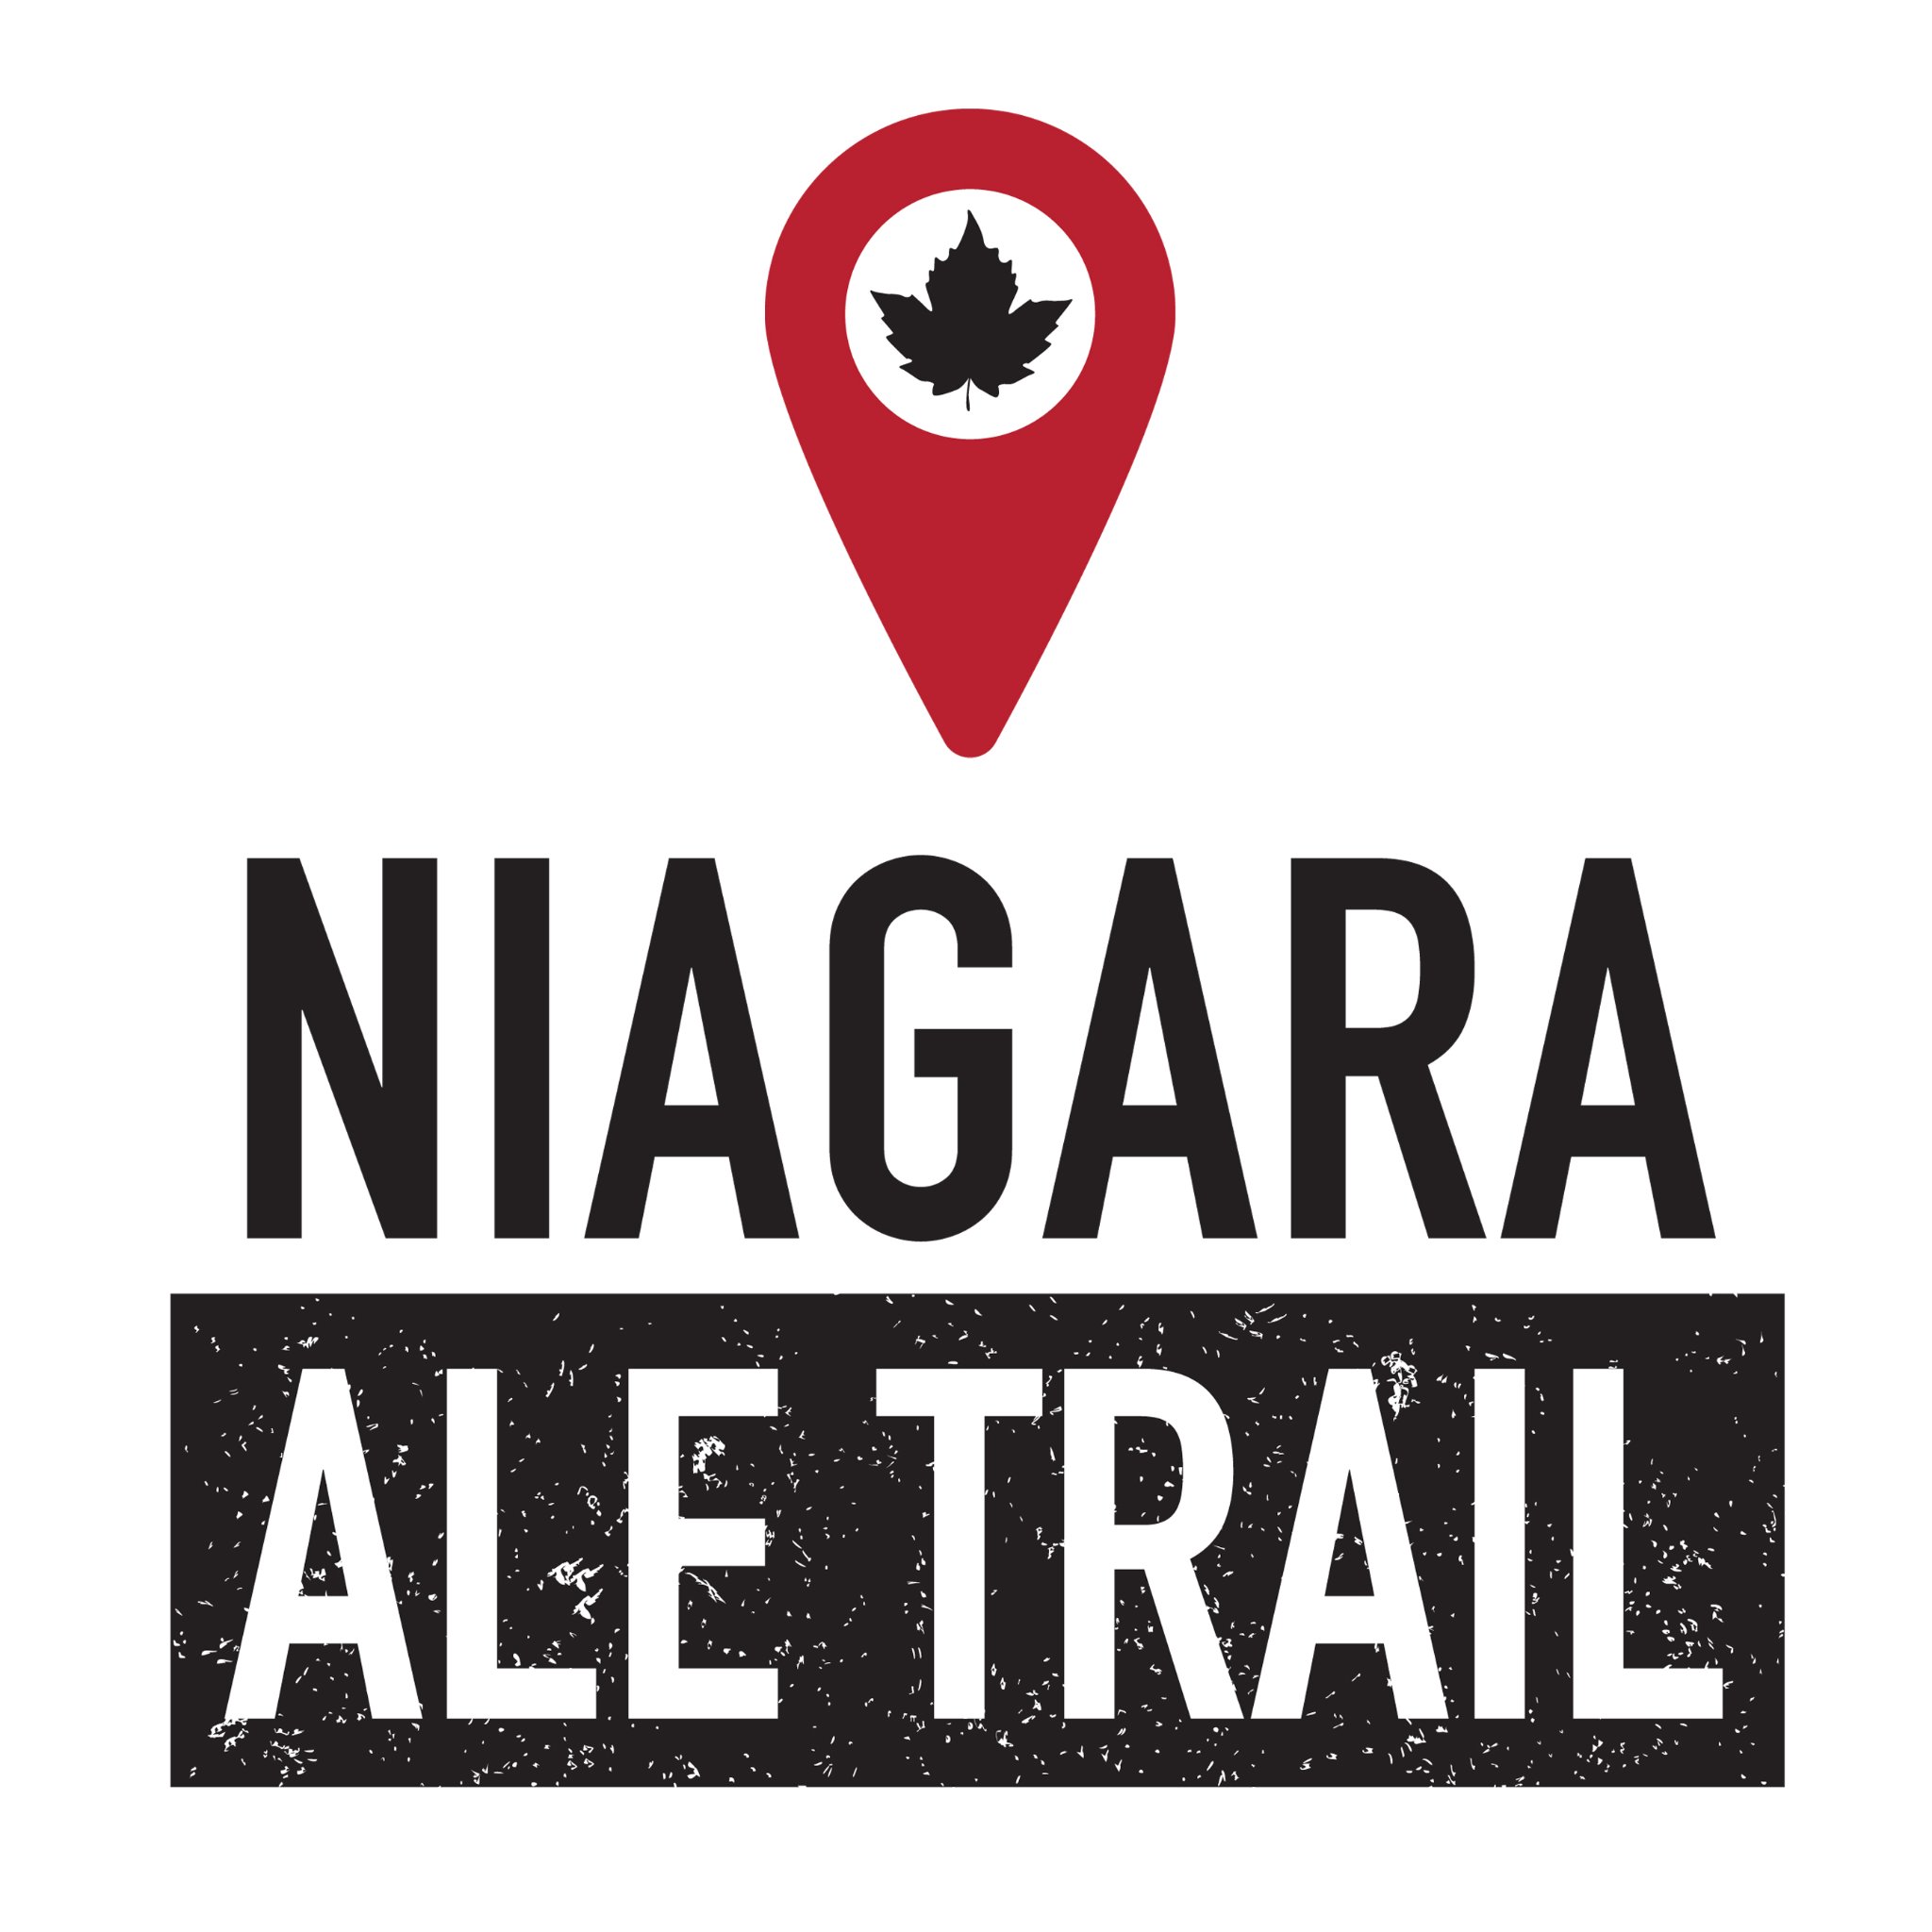 Niagara is known for the water, we’ve made it better! The Craft Beer scene in Niagara is taking off and there is something to please every palate.